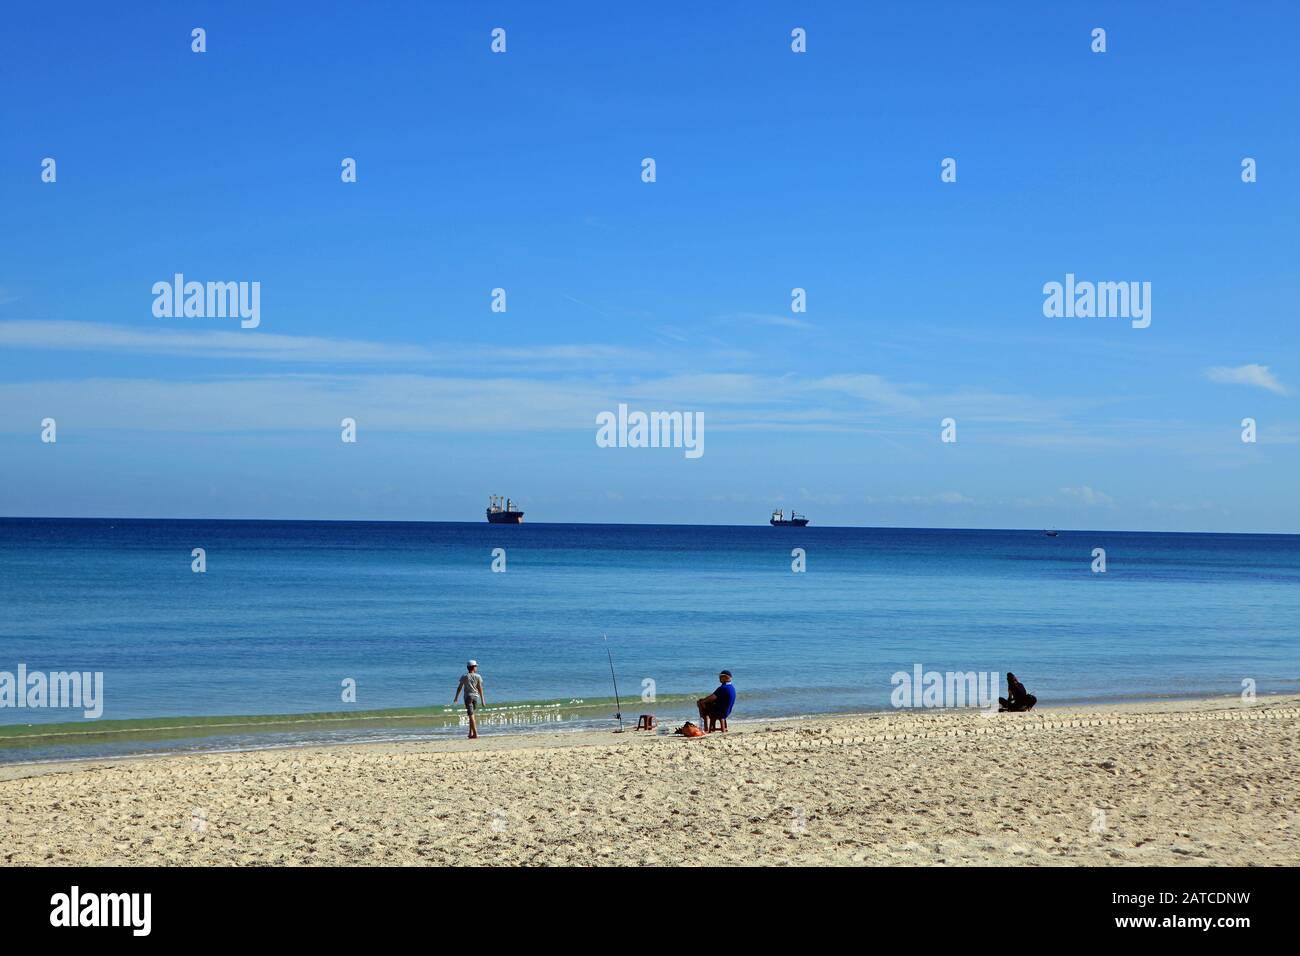 Sousse sandy beach and sea view Stock Photo